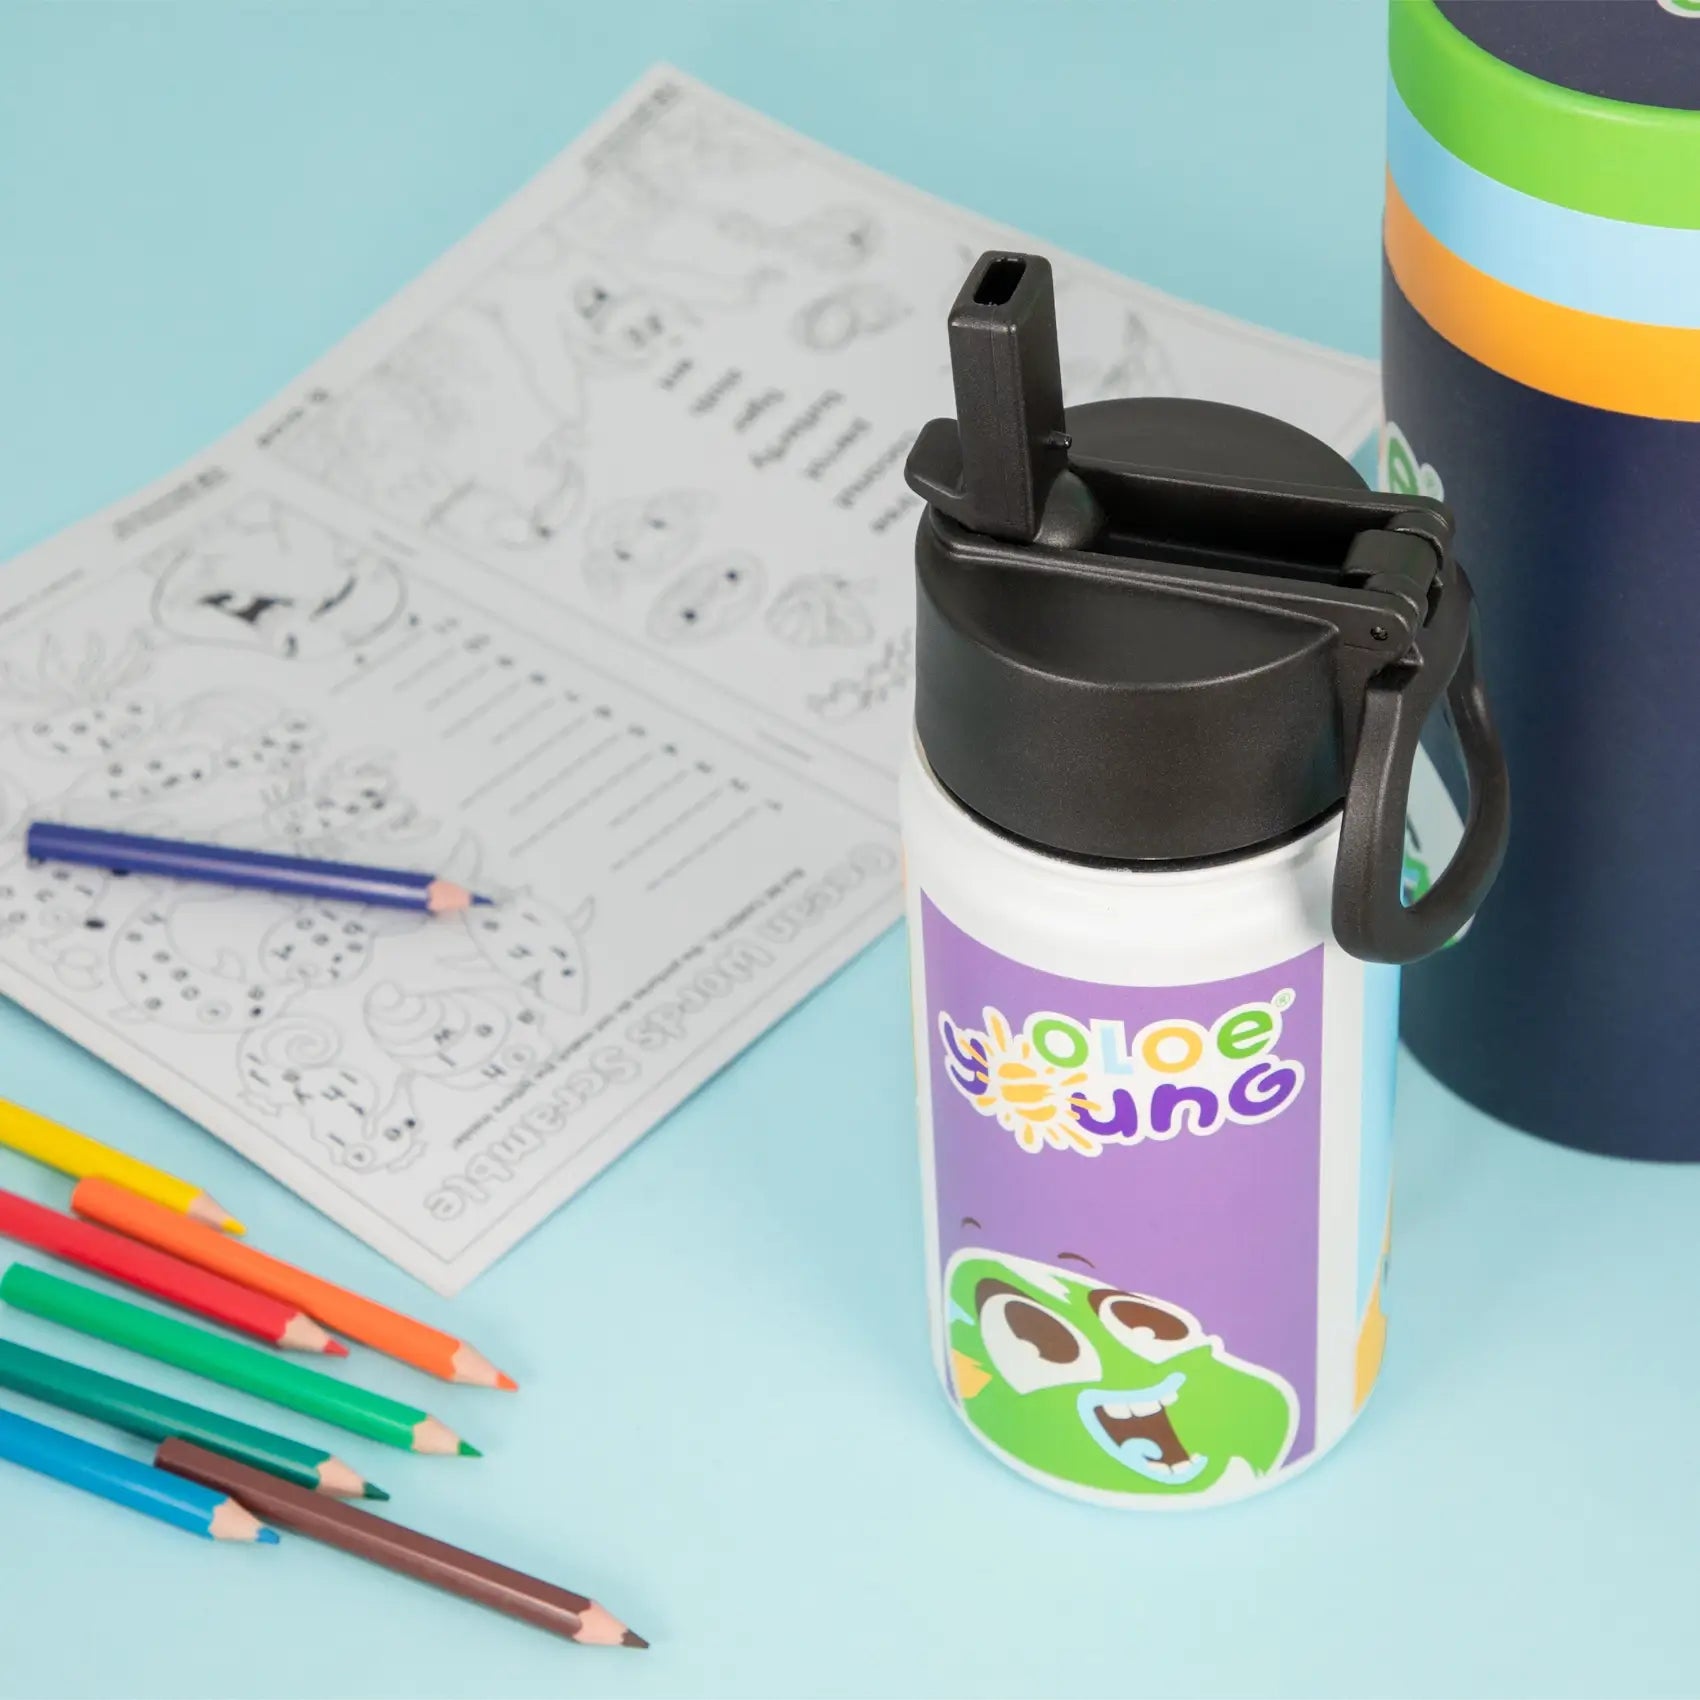 oloe-character-drink-bottle-black-product-lifestyle-shot-with-colouring-book-and-pencils